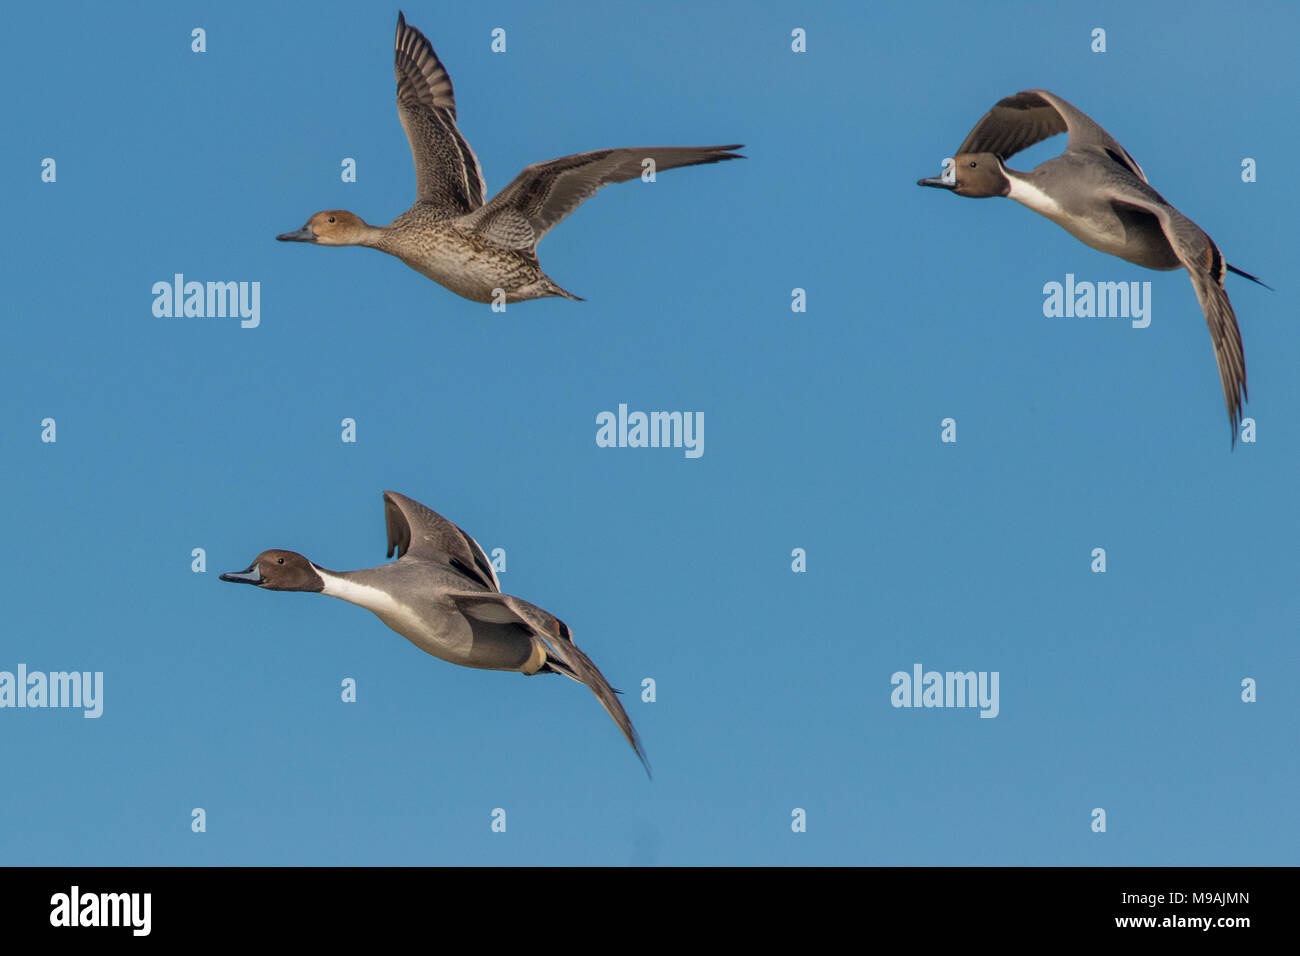 Northern Pintail goup in formation flight Stock Photo